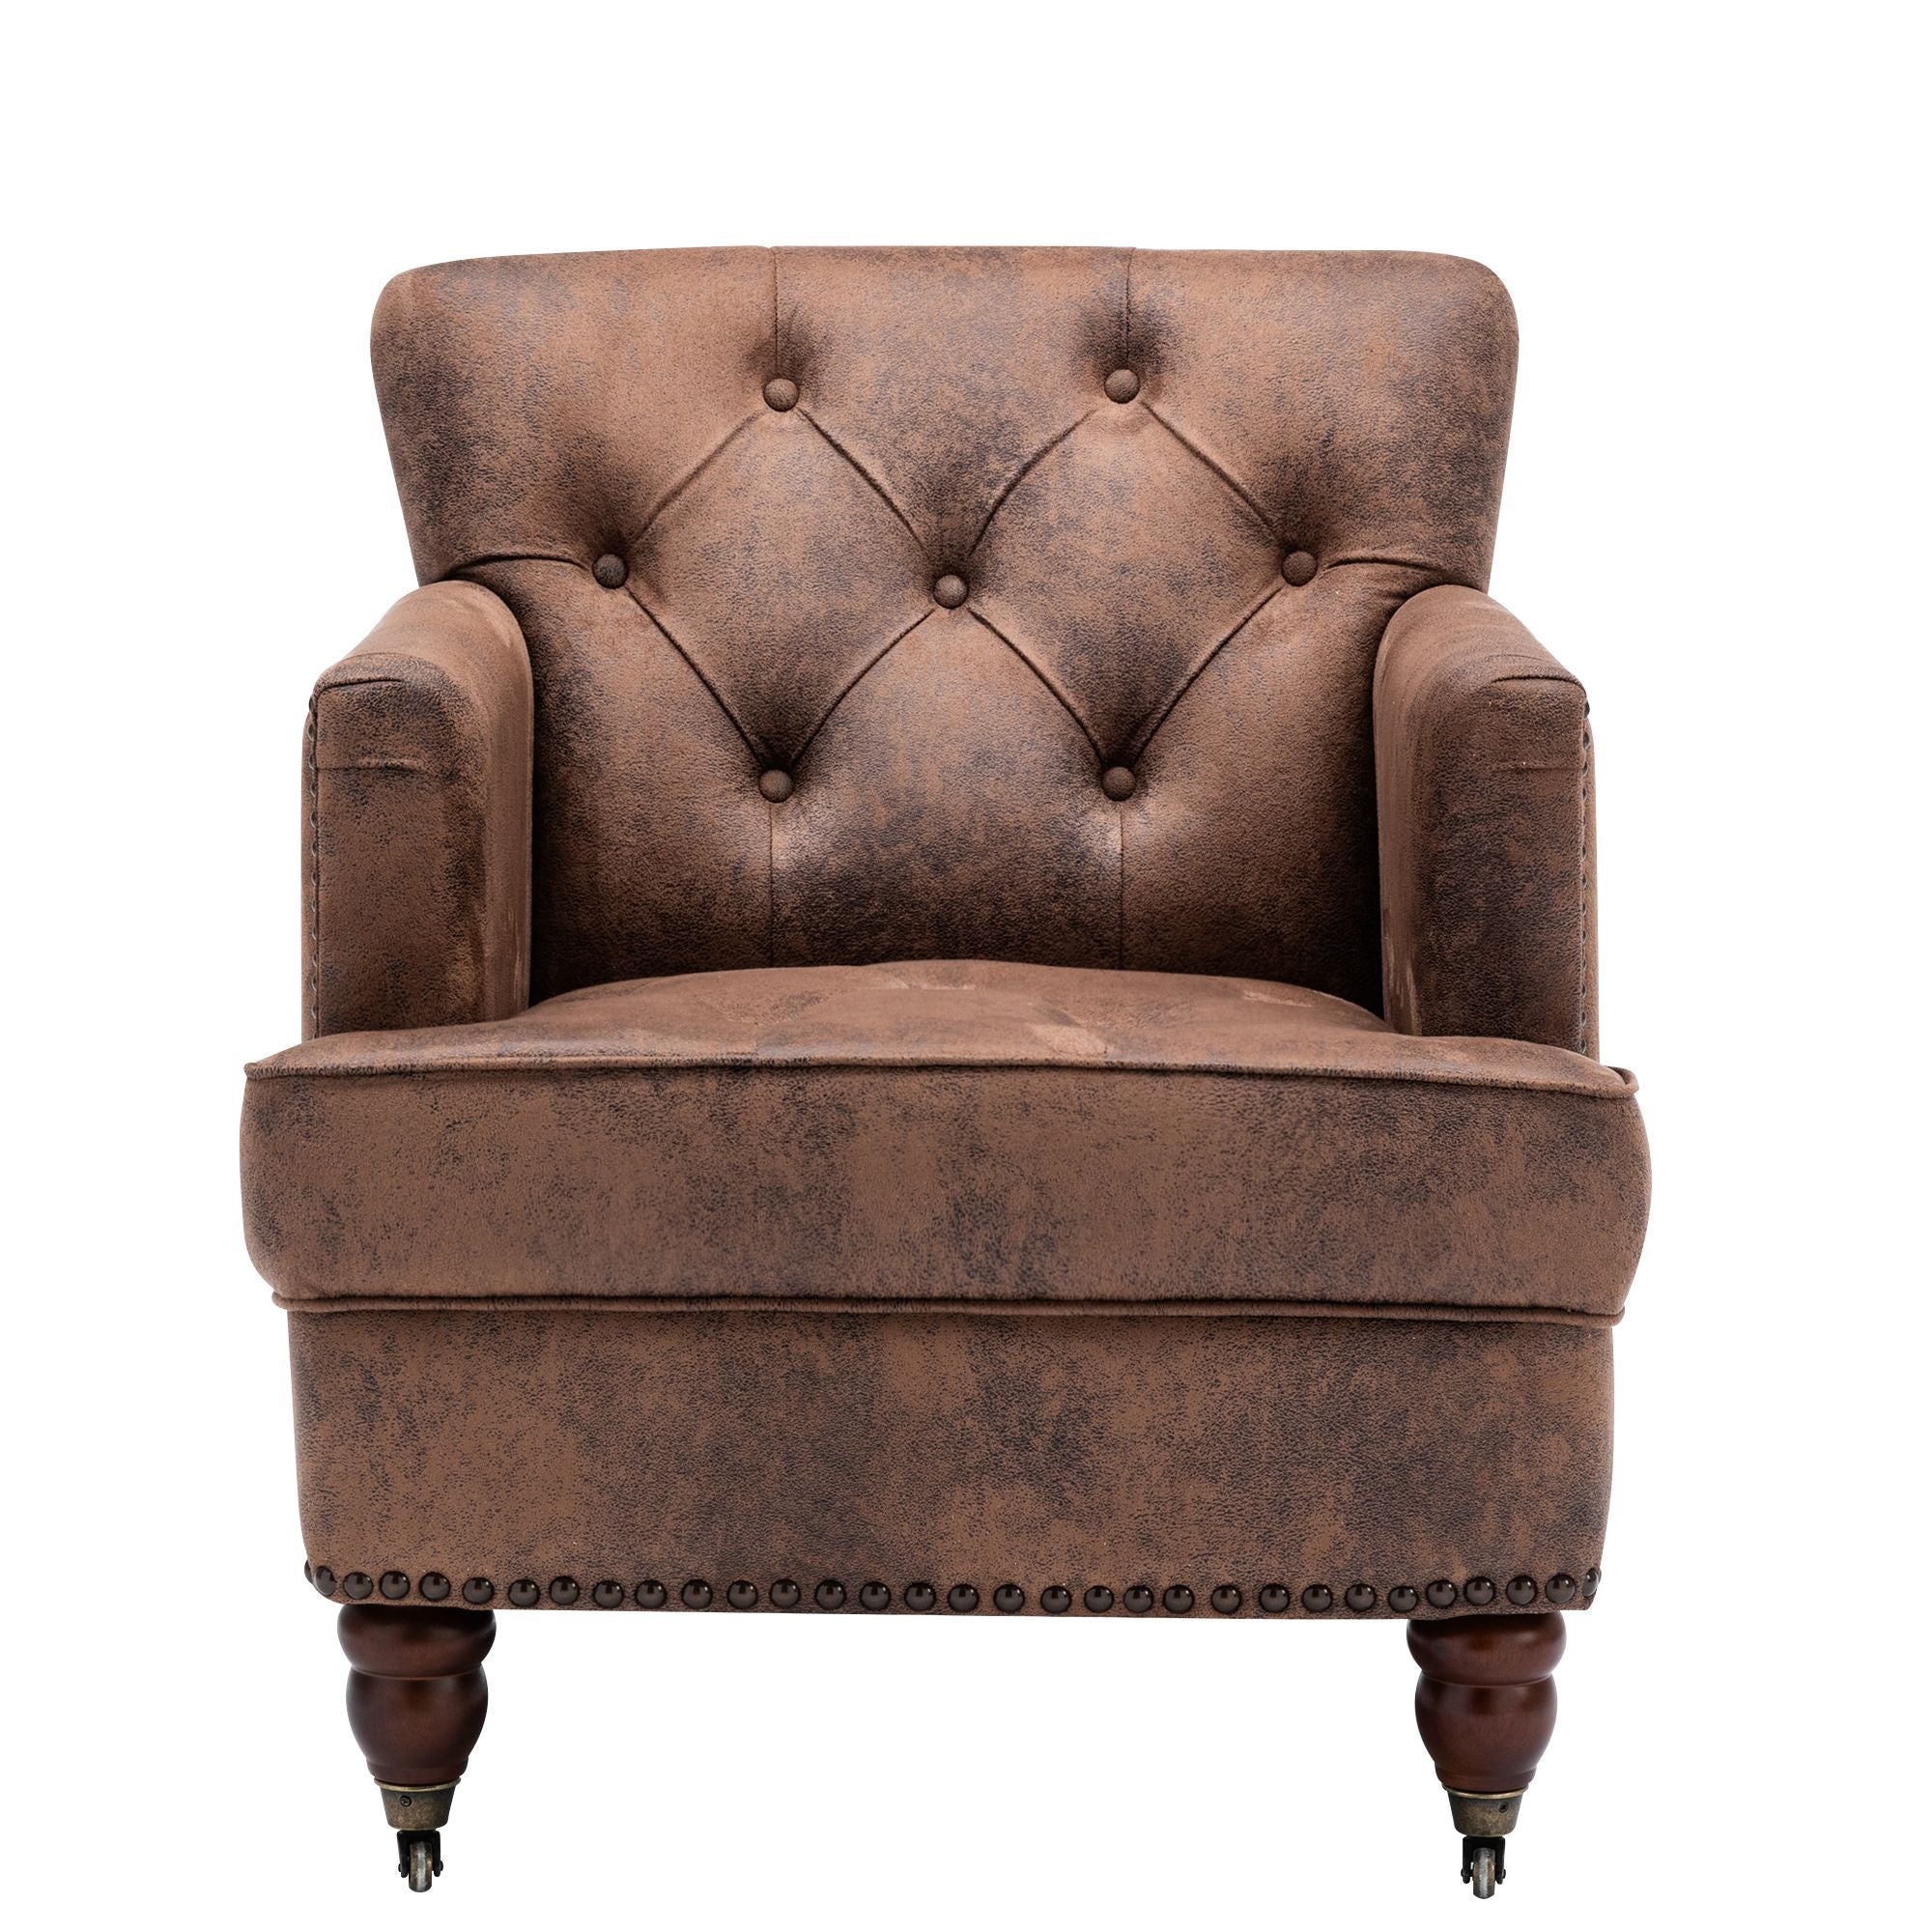 Living leisure Upholstered Fabric Club Chair, Antique Brown-Boyel Living